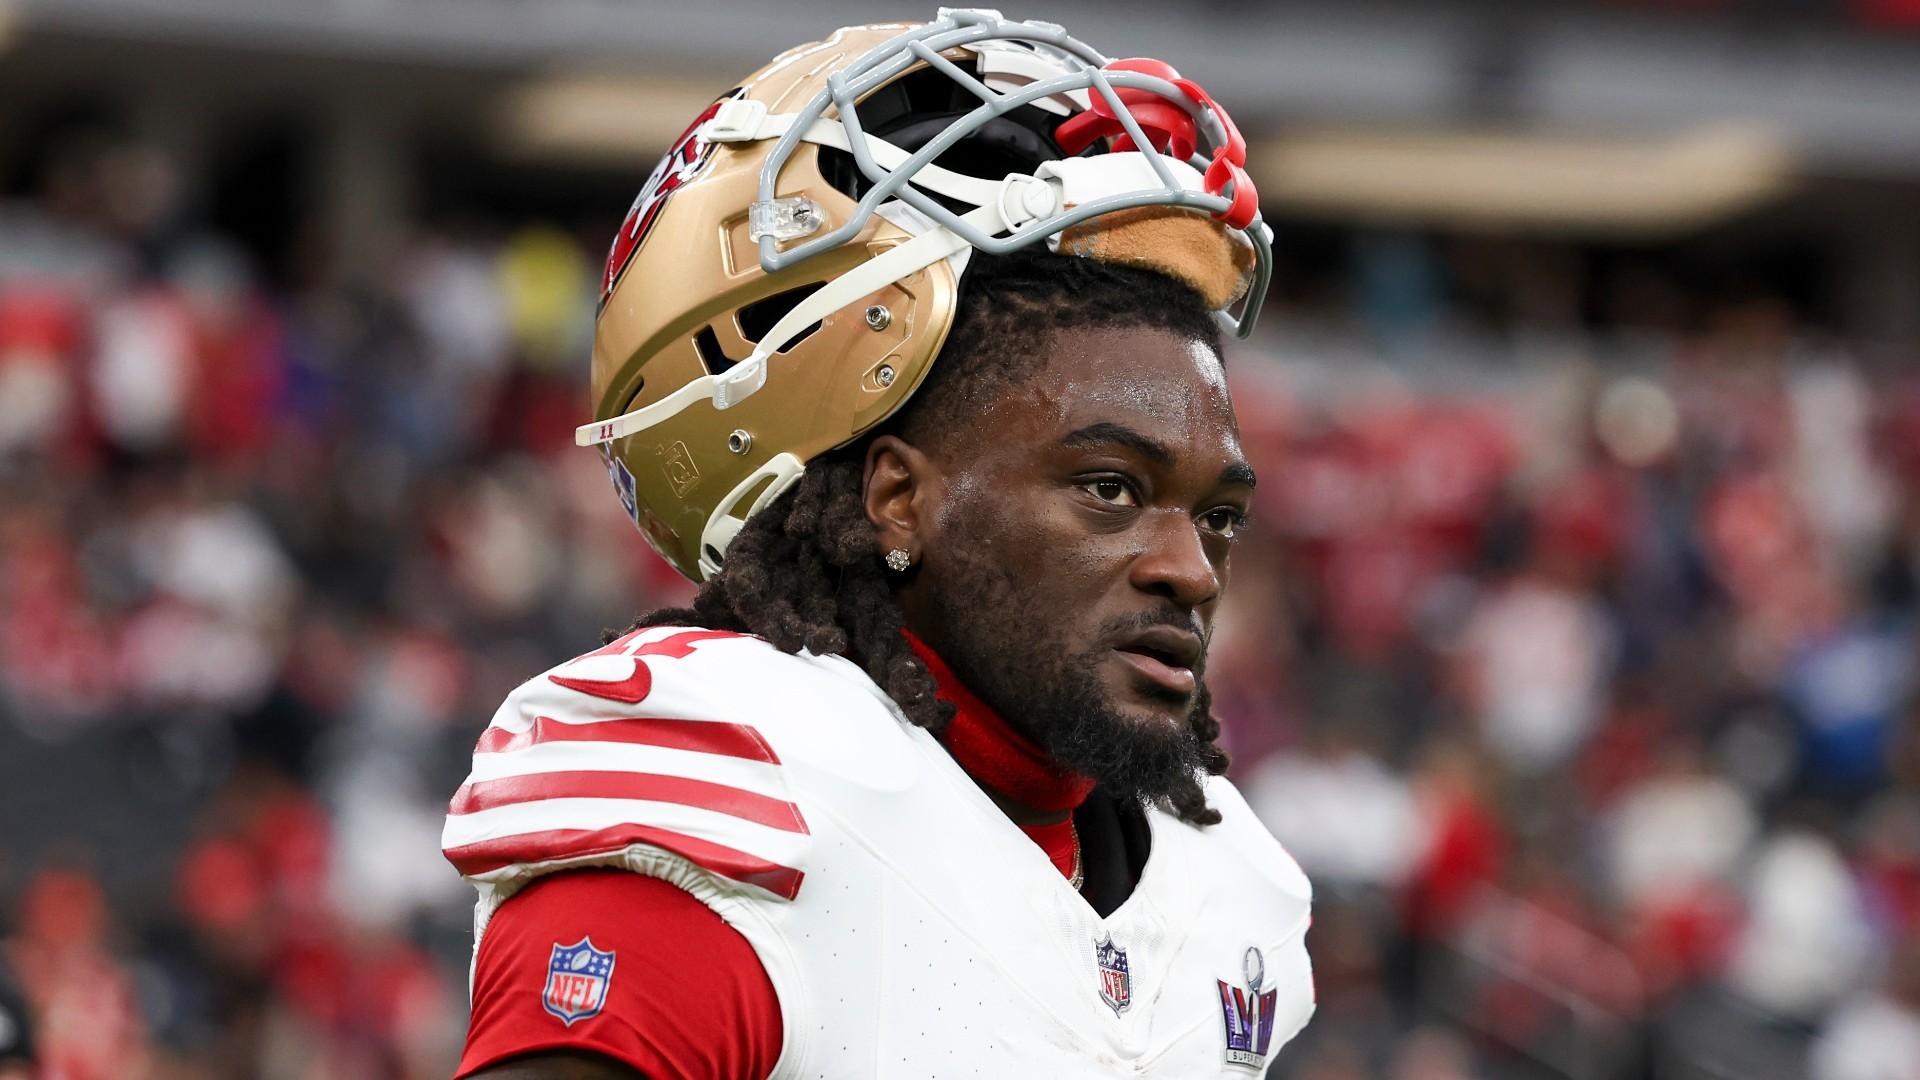 Will Brandon Aiyuk Stay With the 49ers? Inside the Trade Rumors and His Push for a Bigger Contract